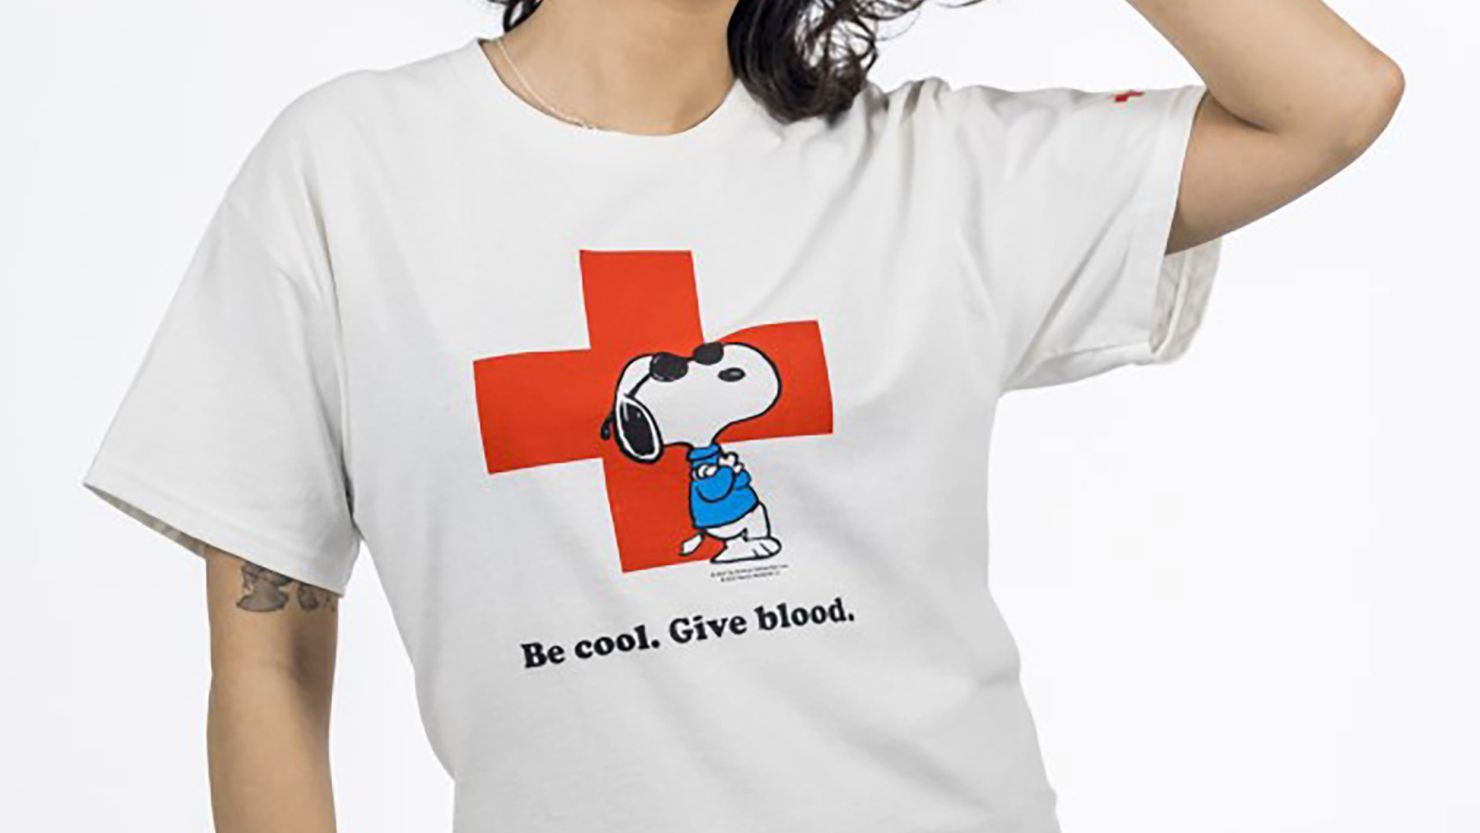 This Red Cross Snoopy shirt has gone viral in recent days, igniting an uptick in blood donations.